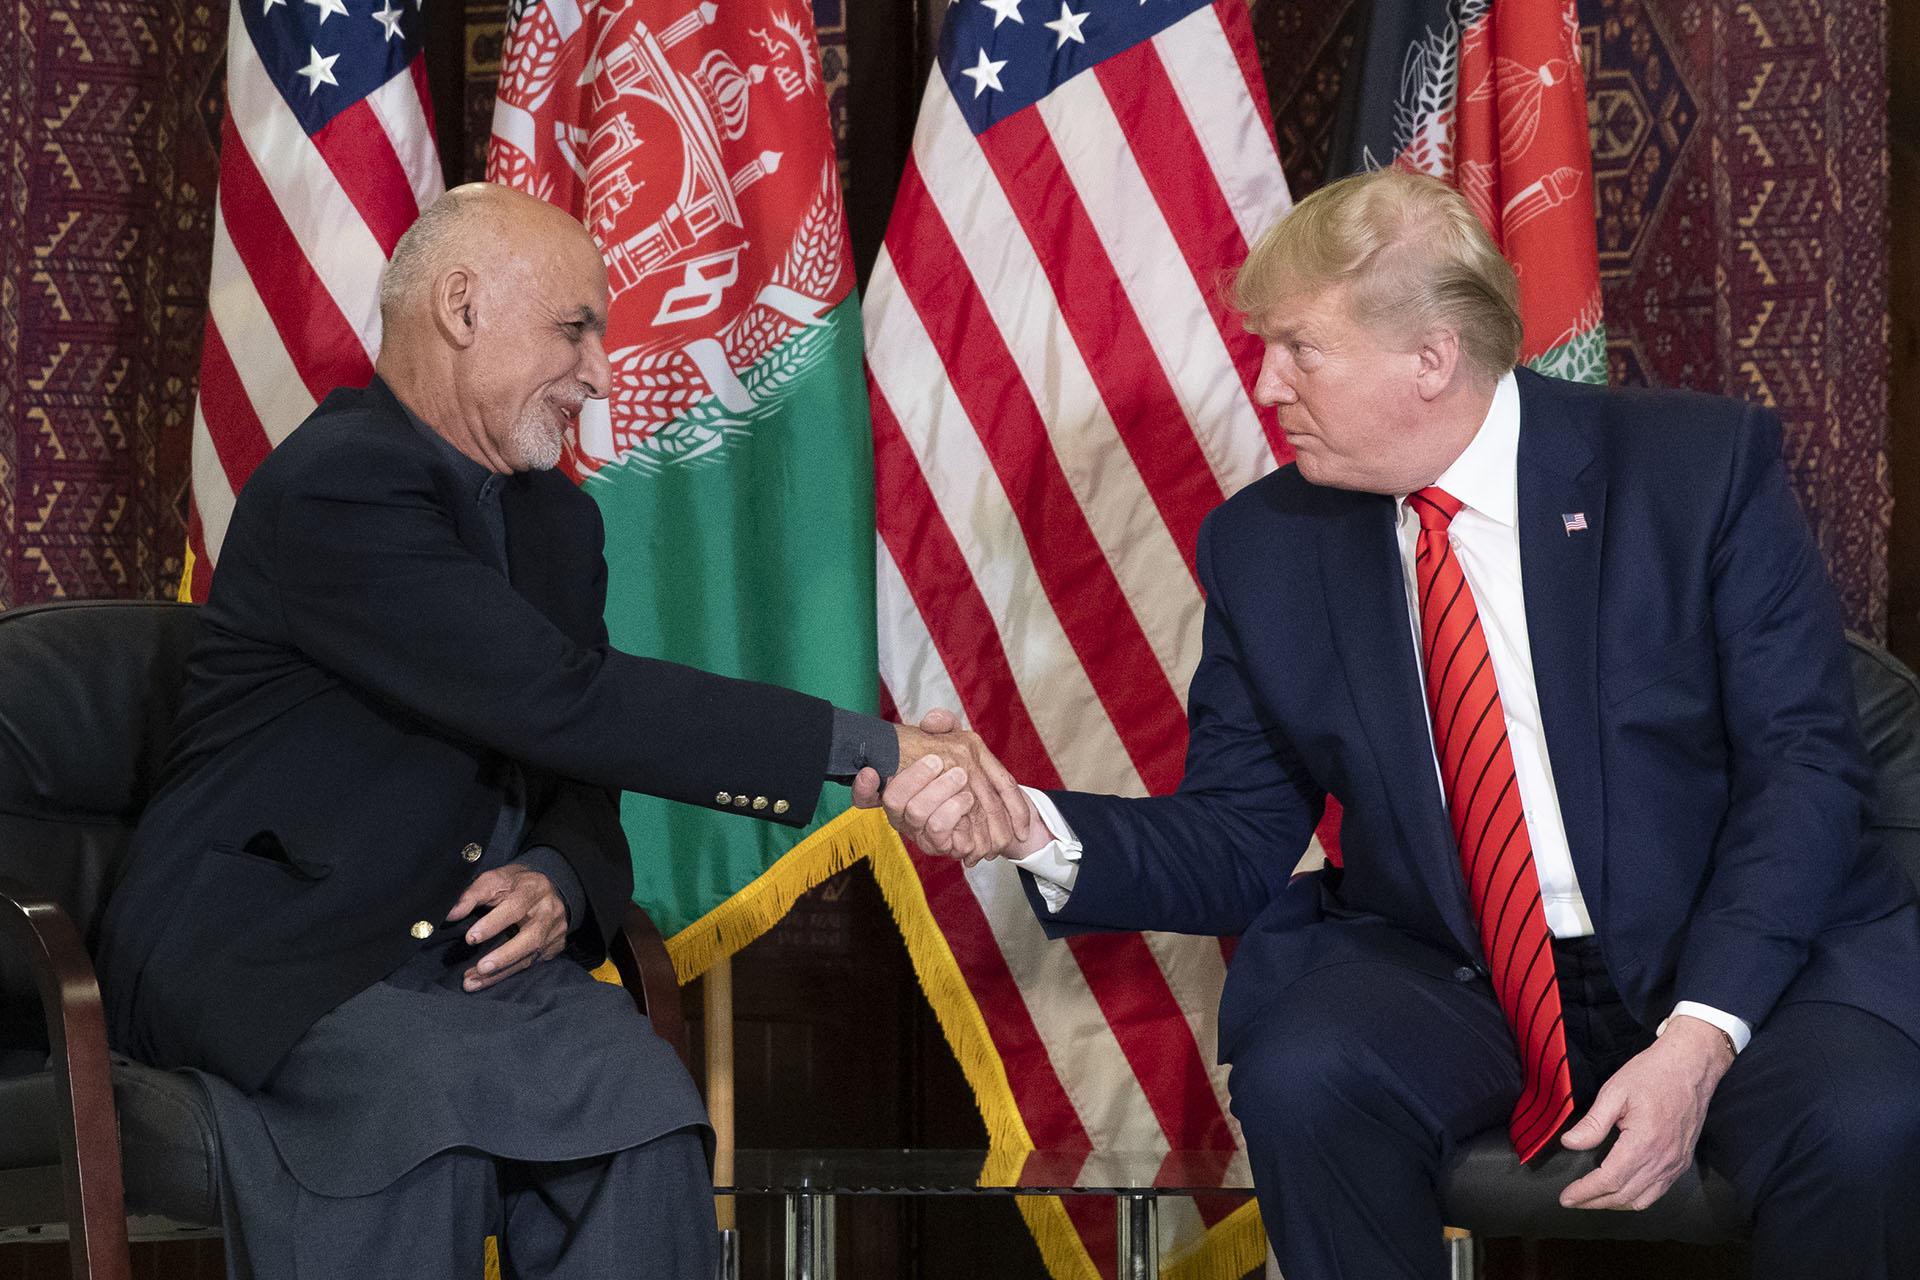 President Donald Trump shakes hands during a meeting with Afghan President Ashraf Ghani during a surprise Thanksgiving Day visit, Thursday, Nov. 28, 2019, at Bagram Air Field, Afghanistan. (AP Photo / Alex Brandon)